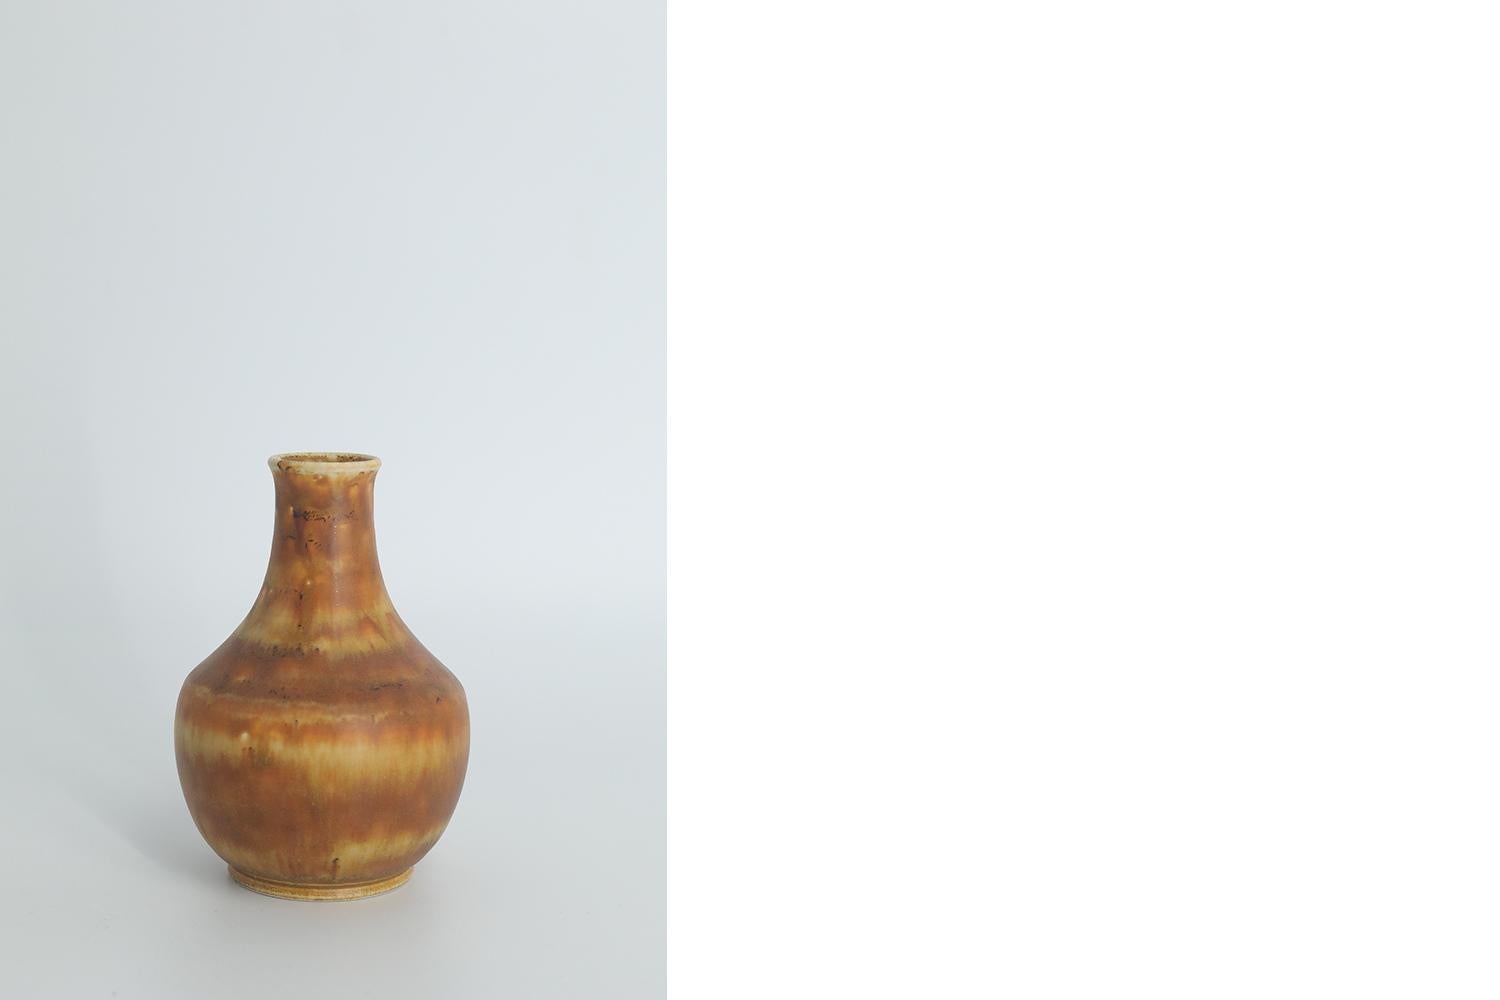 Scandinavian Modern Collectible Small Brown Stoneware Vase by Gunnar Borg  In Excellent Condition For Sale In Warszawa, Mazowieckie